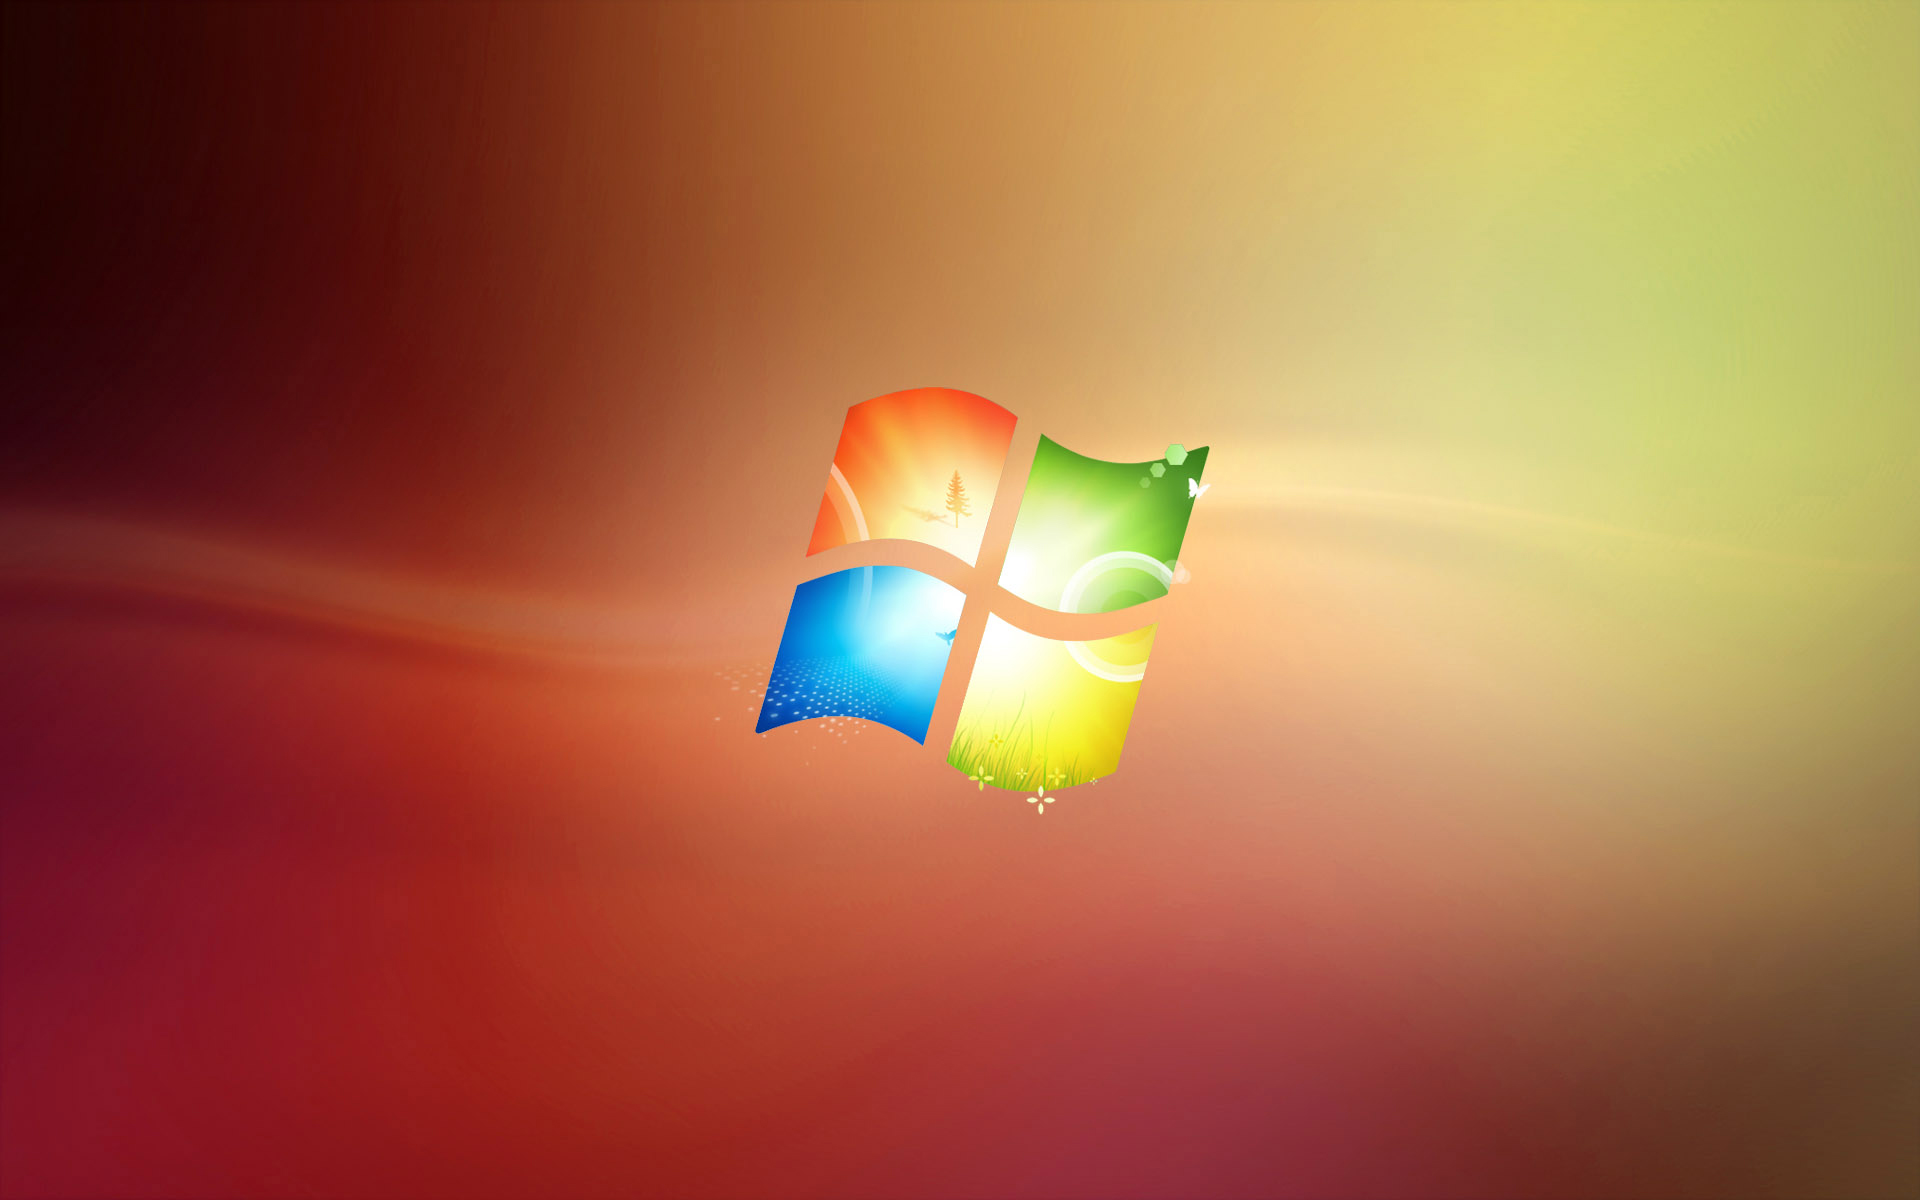 Windows Image Summer Theme HD Wallpaper And